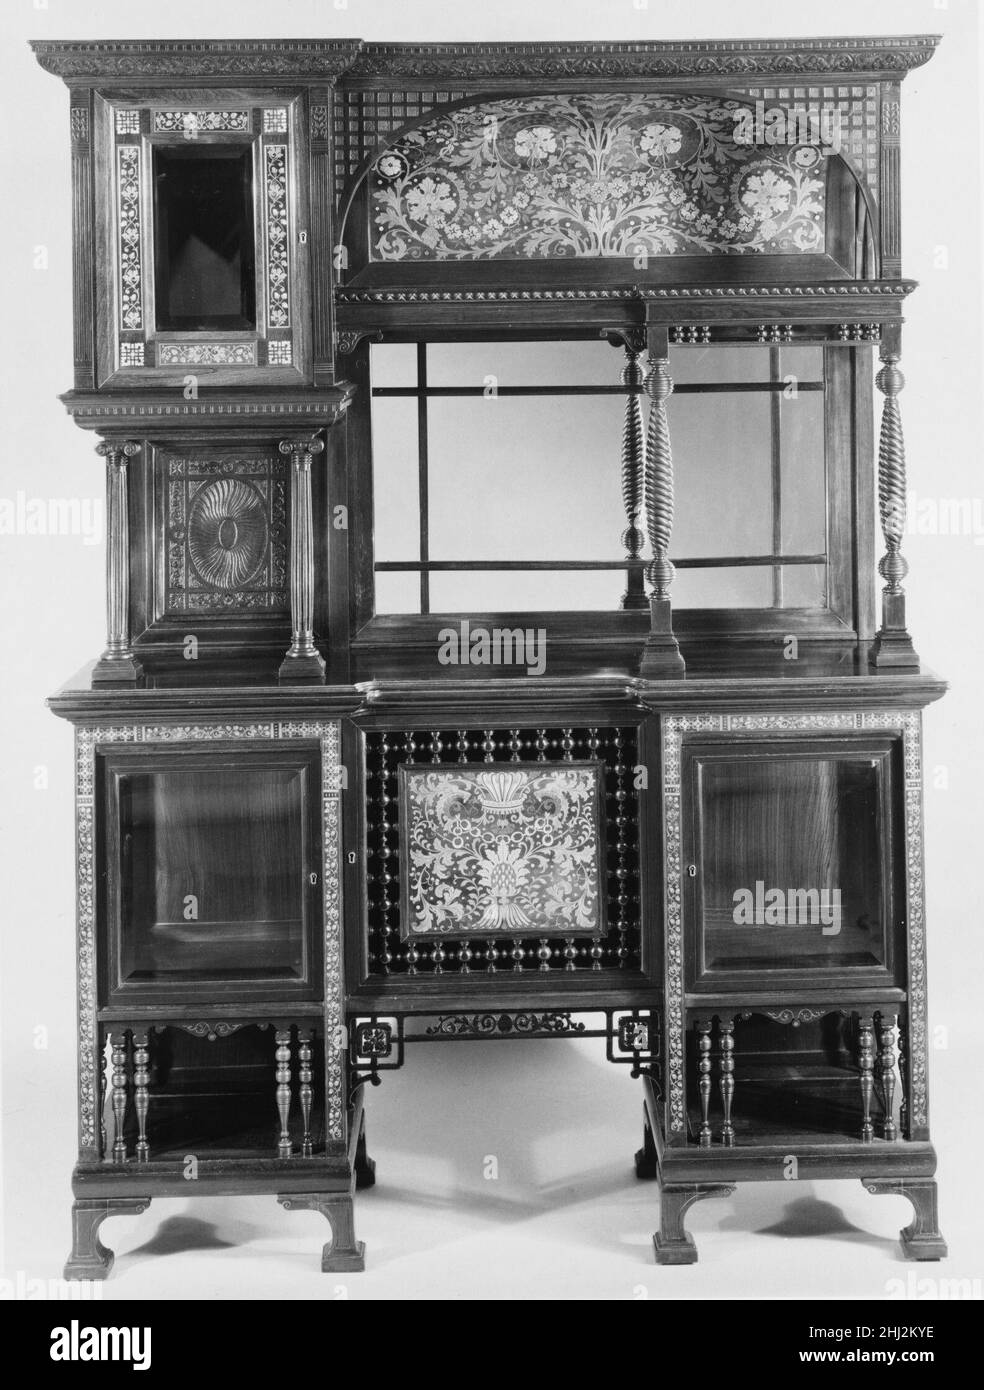 Cabinet ca. 1884 Charles Tisch This cabinet was a gift of its maker, Charles Tisch, to the Metropolitan Museum in 1889. In his offer of the gift, he wrote, 'This piece of Furniture received the first price [sic] at the New Orleans Exposition [18]84/85. It is a purely American production of my own manufacture and consider it worthy of a place in the Museum.' While the cabinet may have been made on American soil, it borrowed design motifs from around the world. Tisch was a German immigrant cabinetmaker living in New York, and his cabinet incorporates Japanese fretwork, Eastlake-inspired spindles Stock Photo